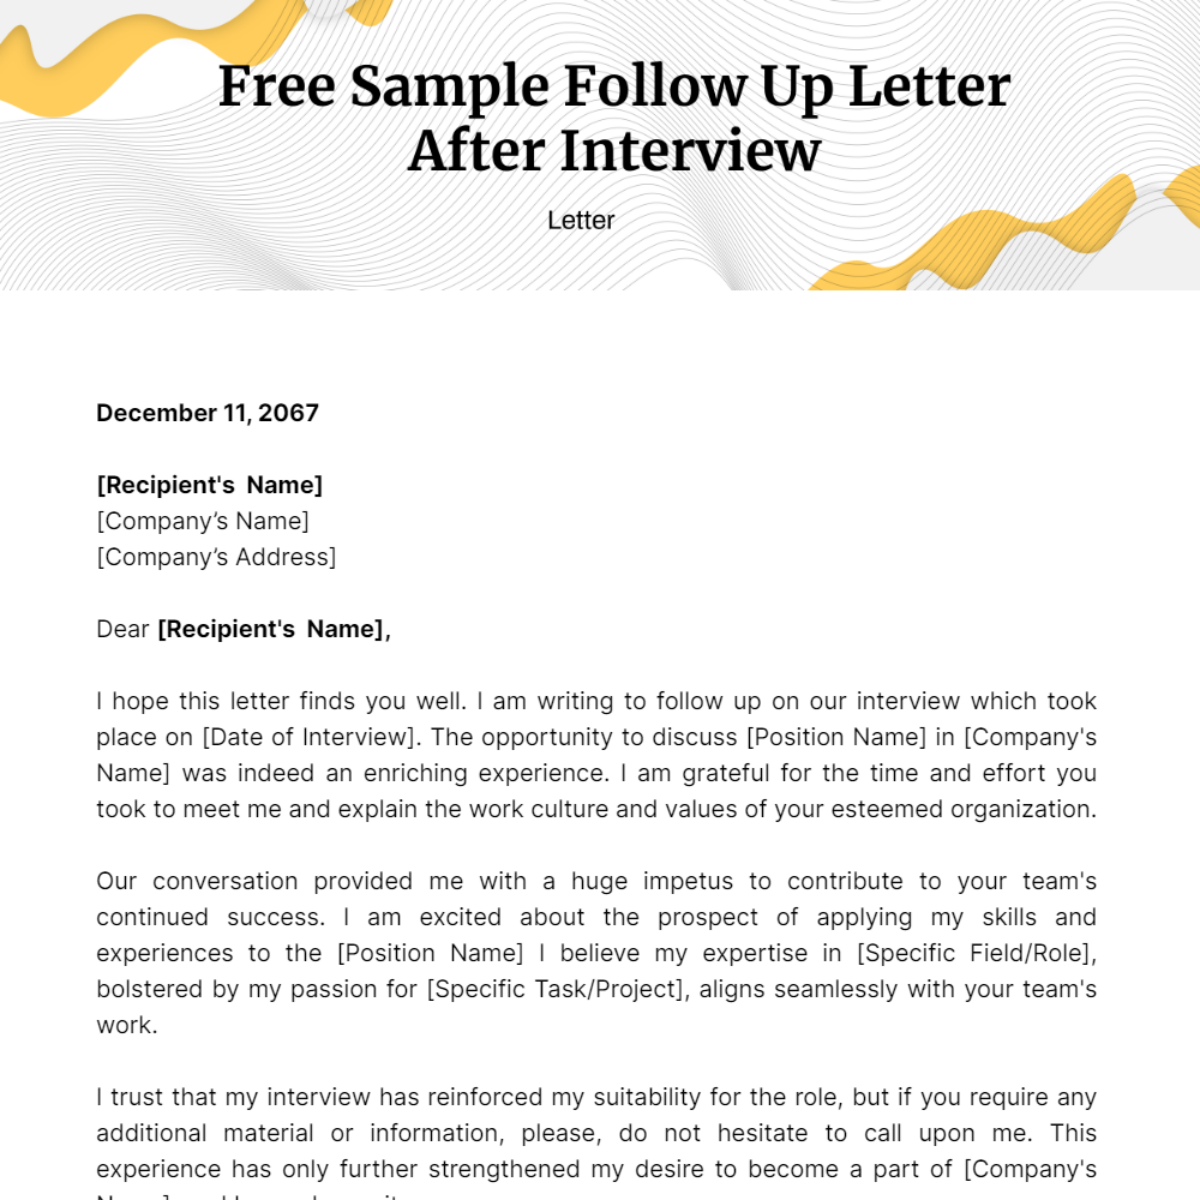 Sample Follow Up Letter After Interview Template